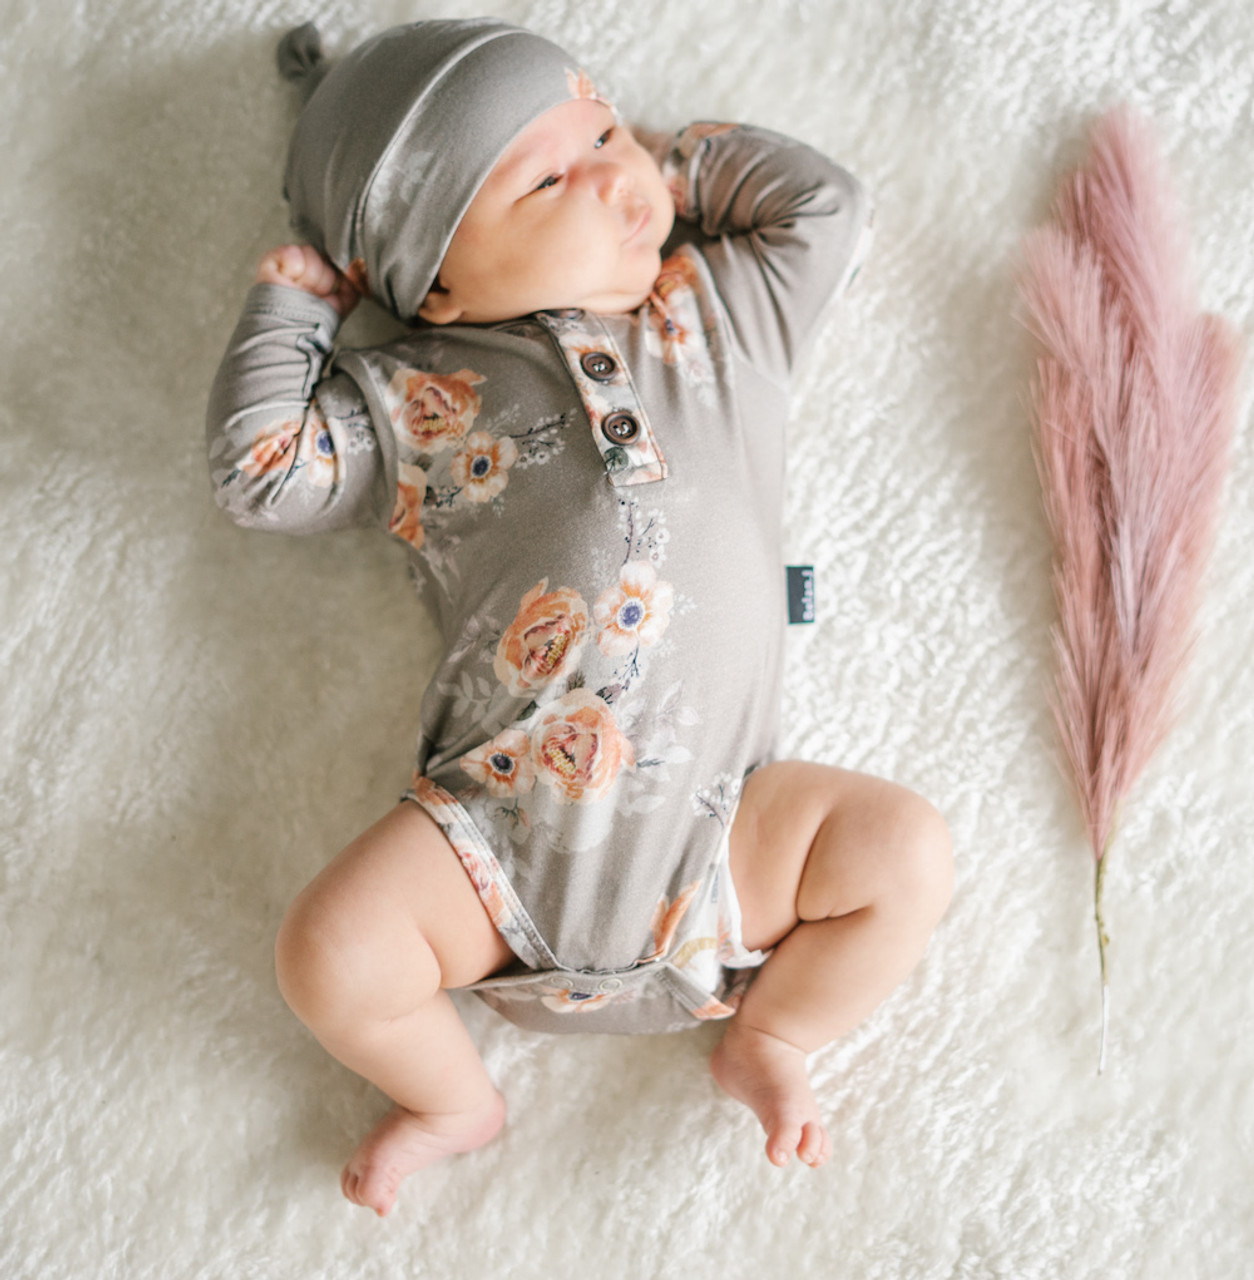 How Should I Dress My Newborn in Summer? - Active Baby Canadian